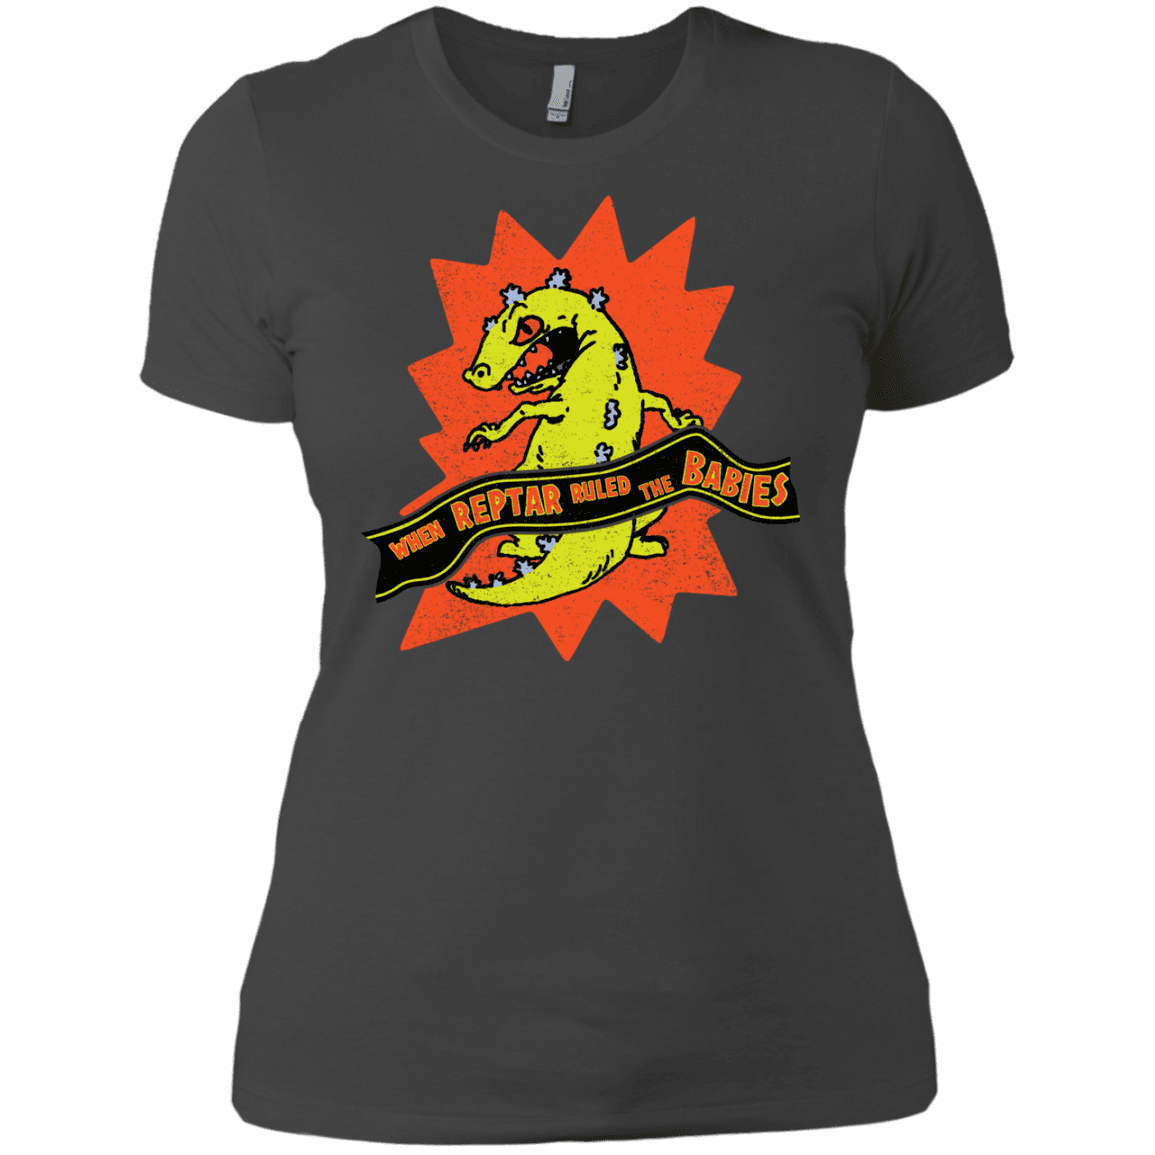 T-Shirts Heavy Metal / X-Small When Reptar Ruled The Babies Women's Premium T-Shirt